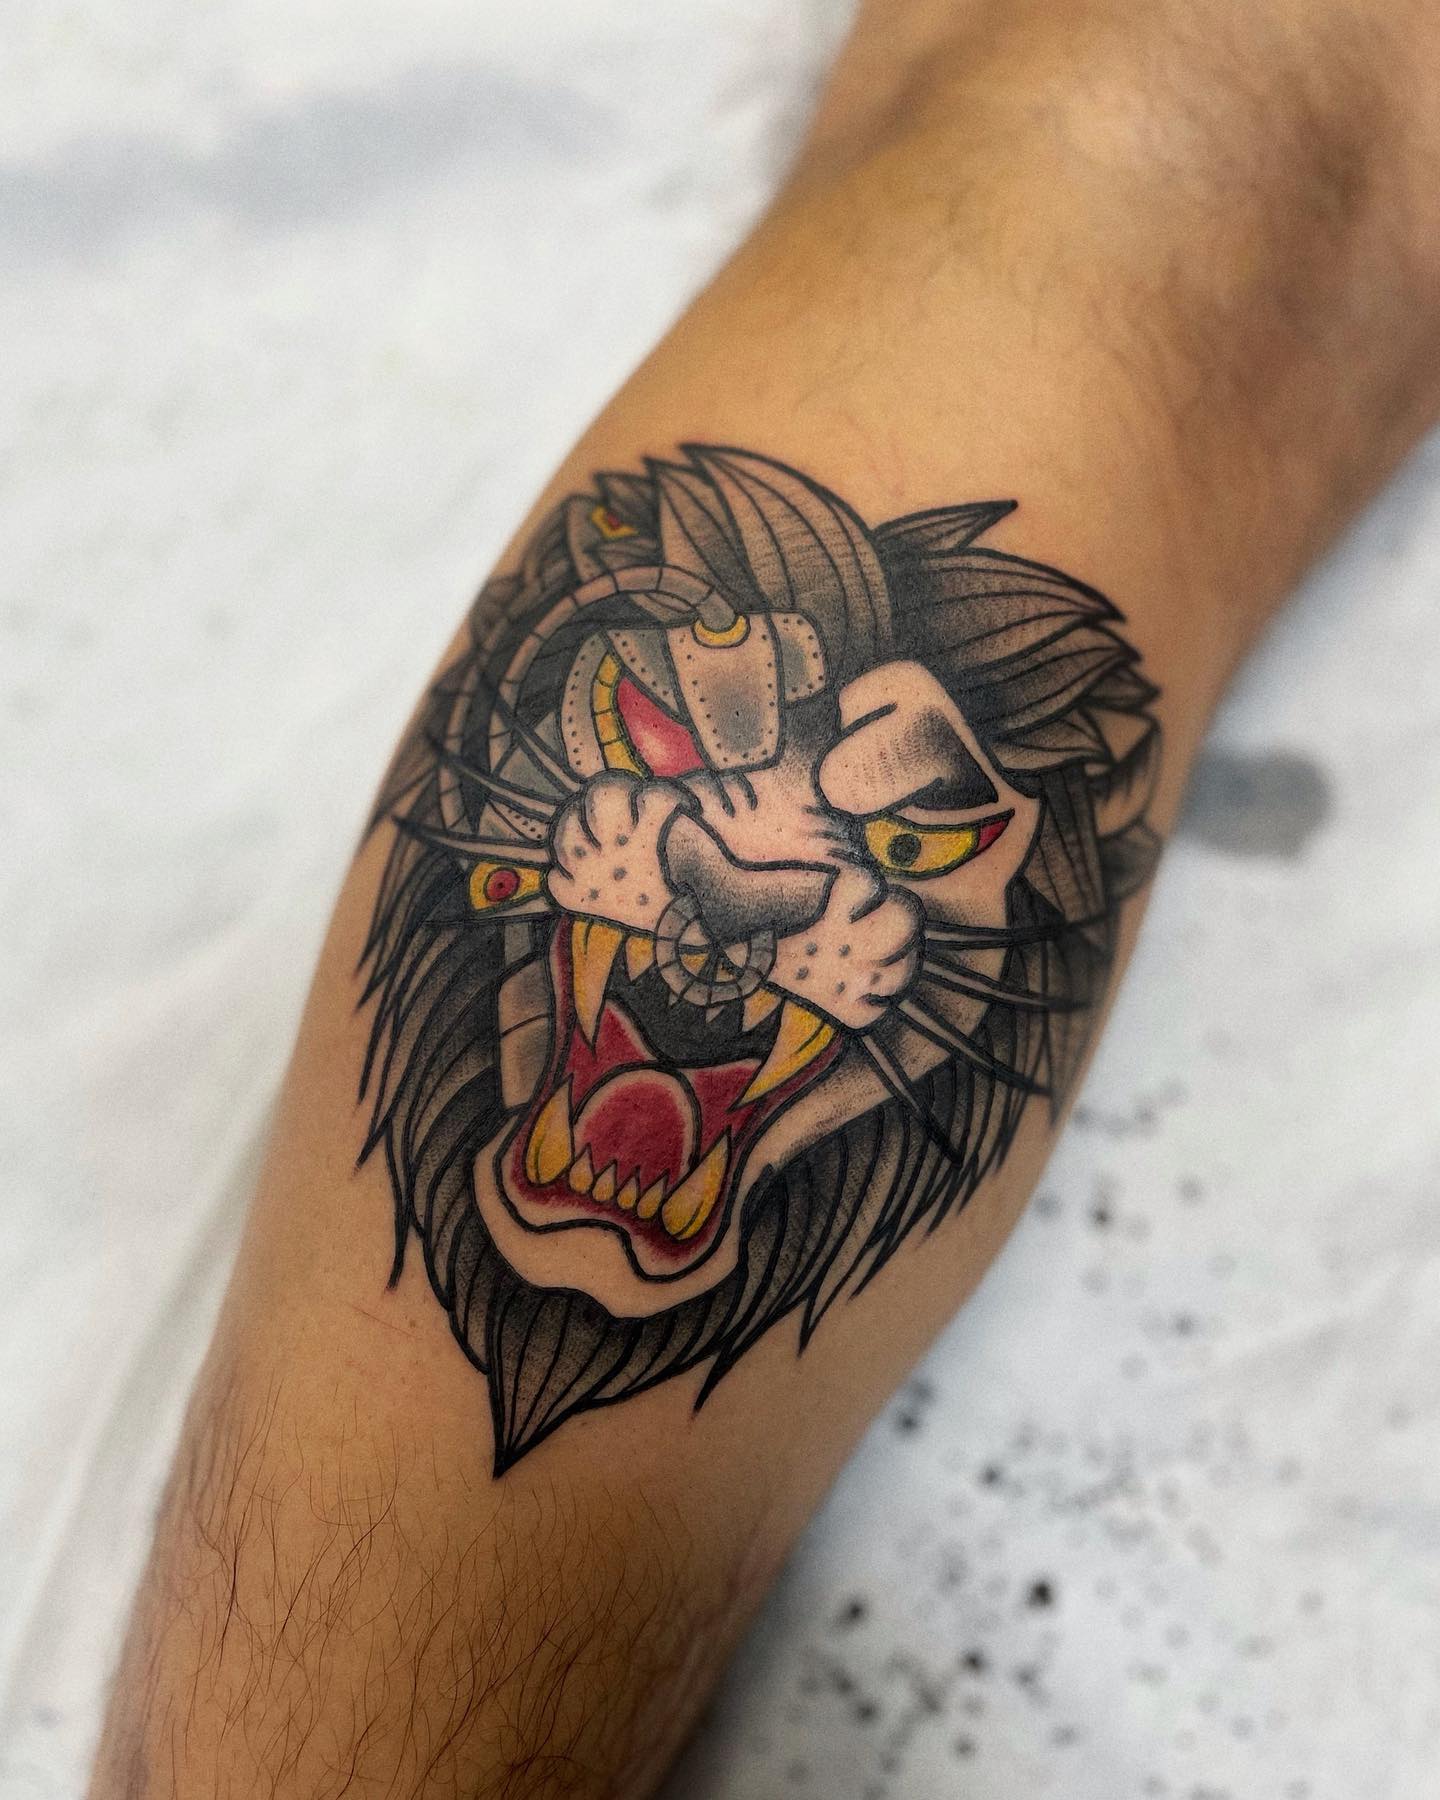 Get a savage lion tattoo on your body to rock.